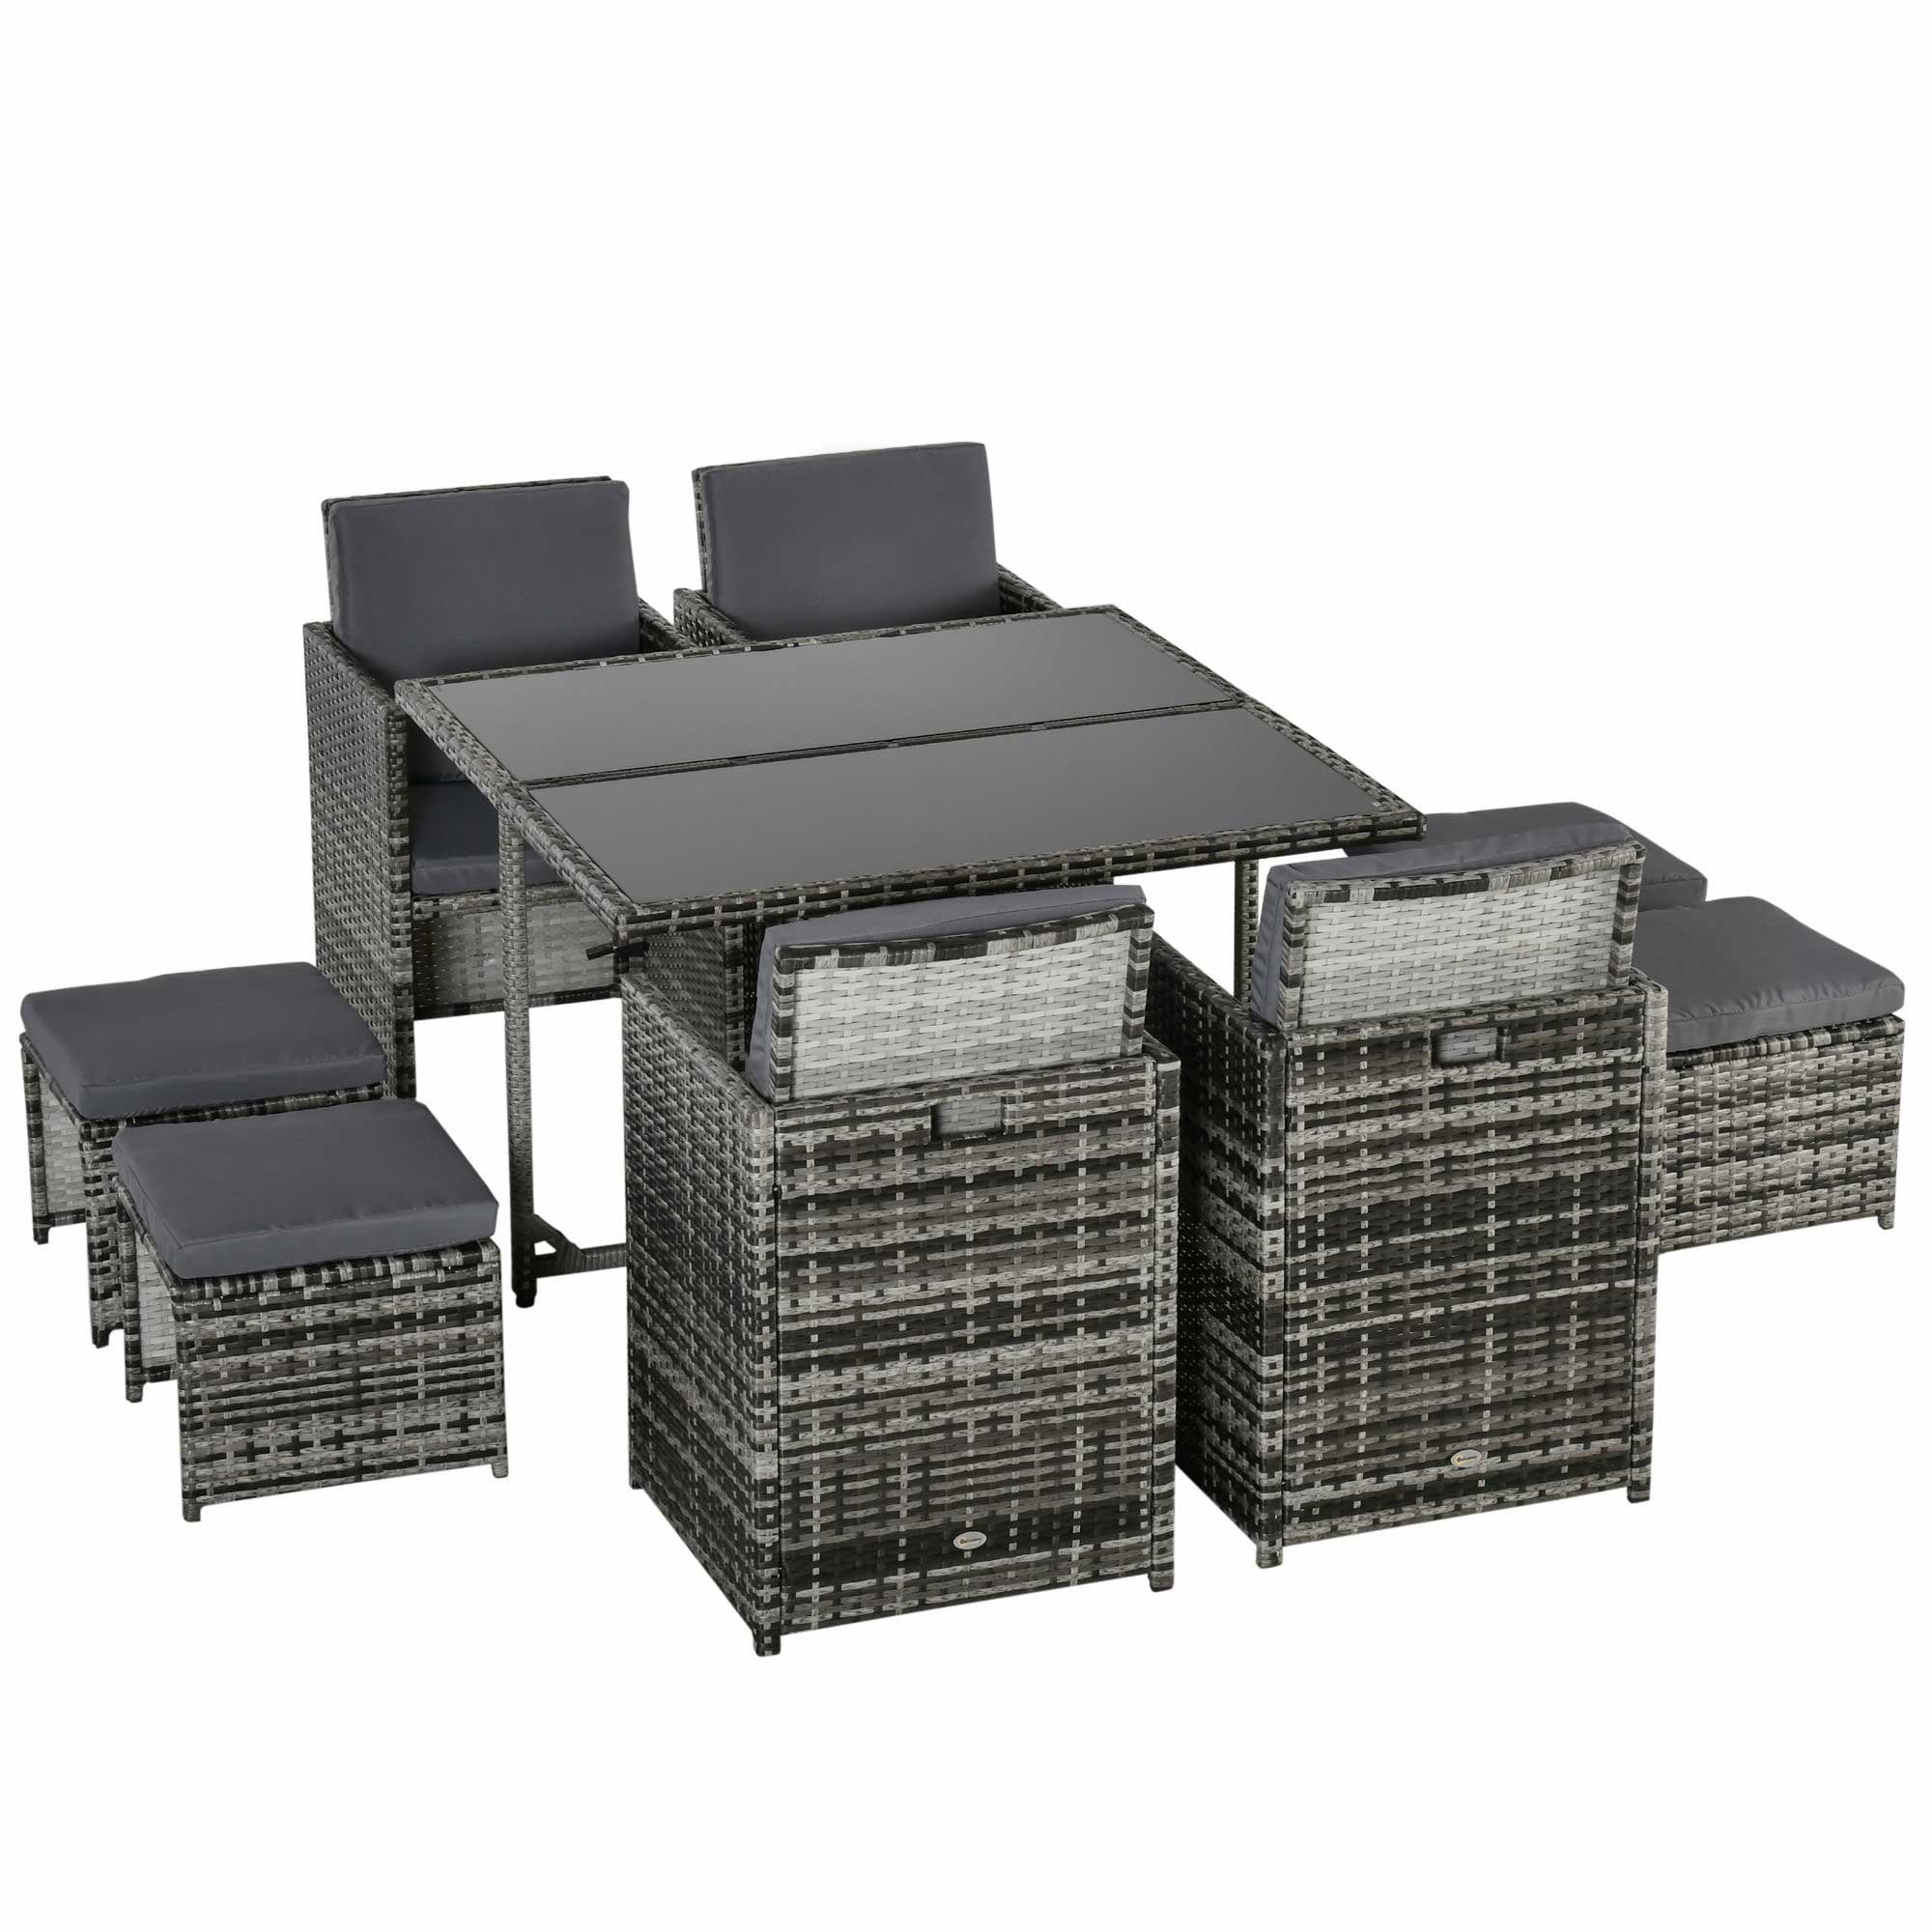 Outsunny 8-Seater Rattan Furniture Set Wicker Weave Patio Dining Table Seat - Grey  | TJ Hughes